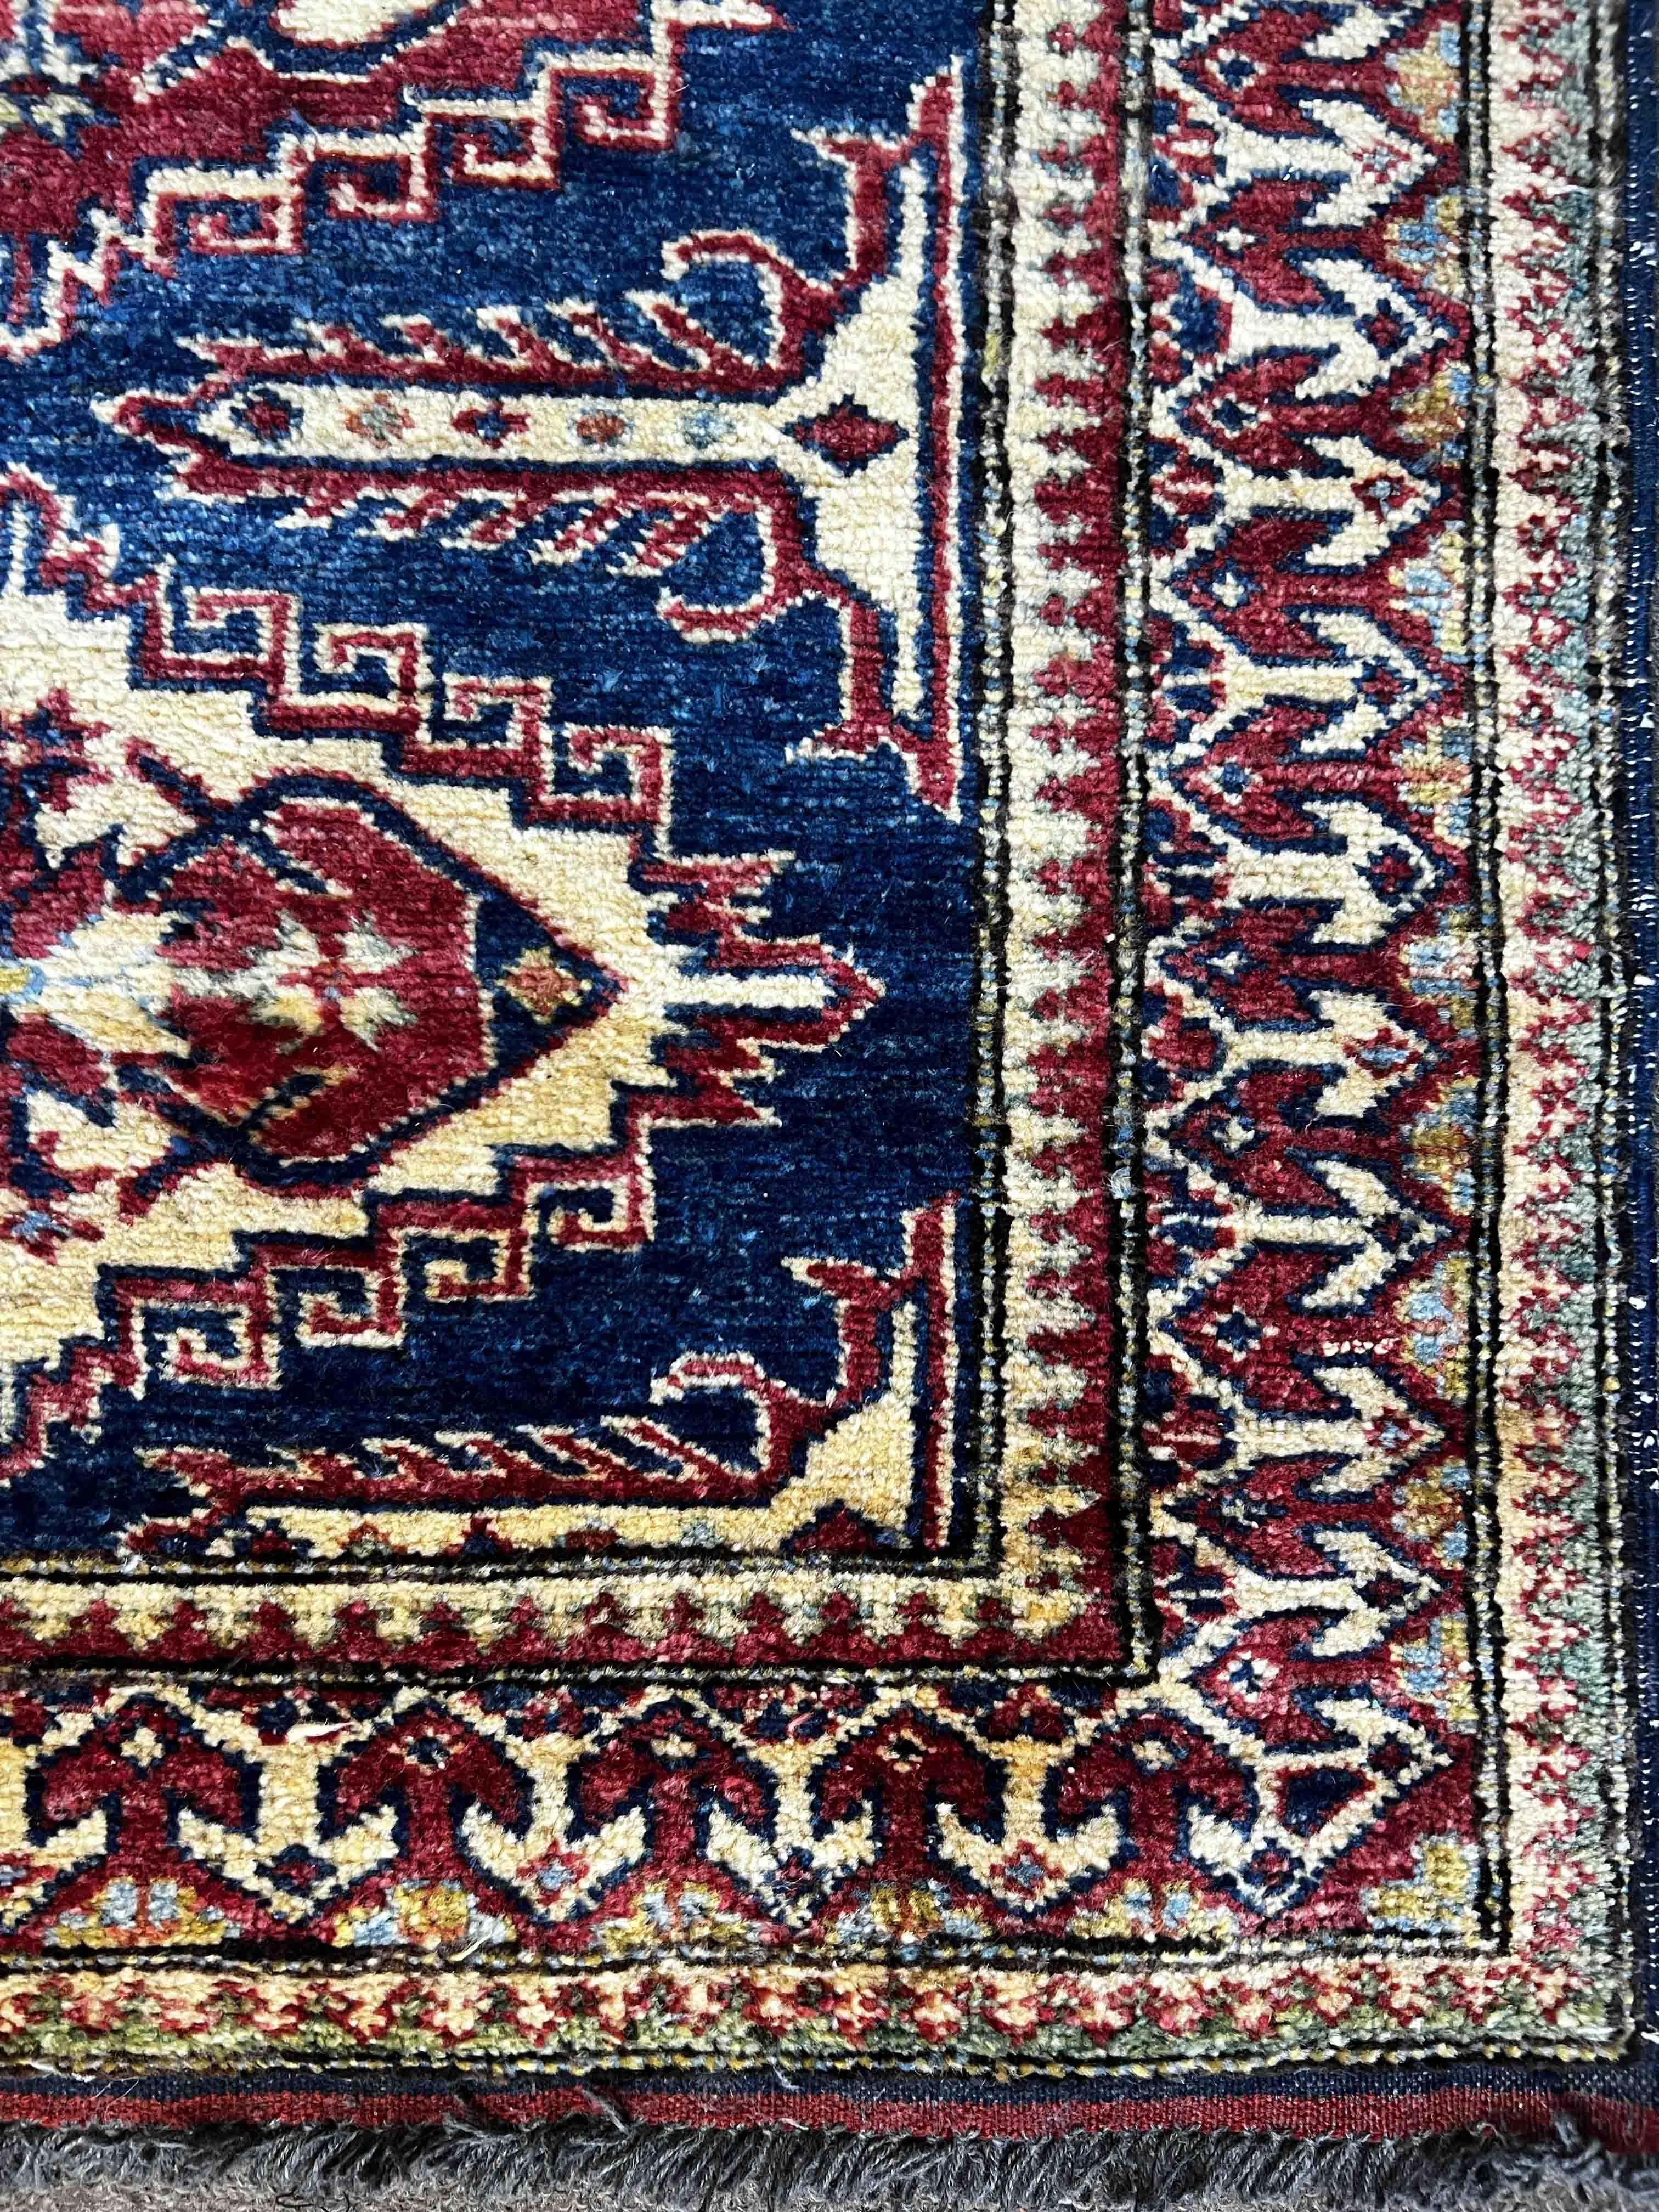 Very pretty Caucasian rug from the 20th century - n° 1182

Thanks to our Restoration-Conservation workshop and also Our know-how, 
we are pleased to present to you works of art in fabric such as Tapestry, 
Carpets and Textiles in very good